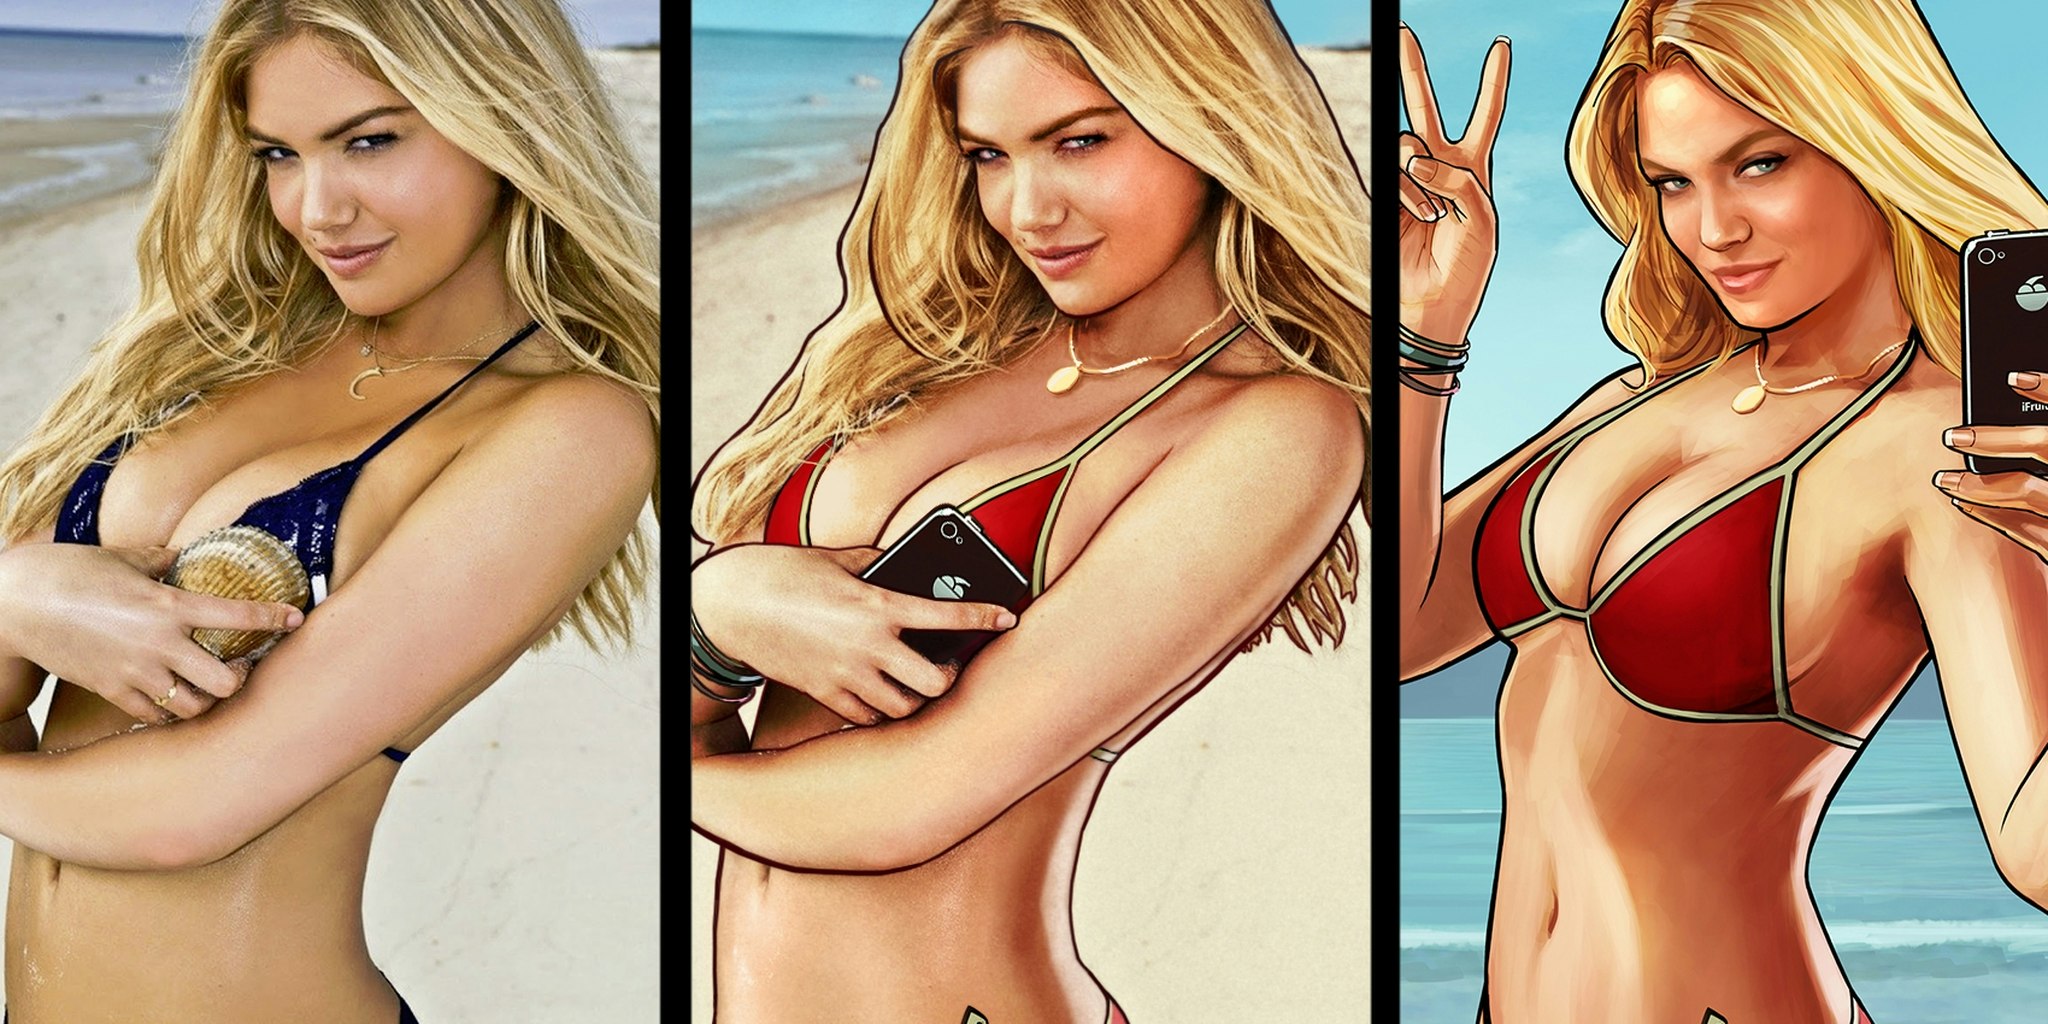 Thats not Kate Upton in the Grand Theft Auto V ads—its this model pic